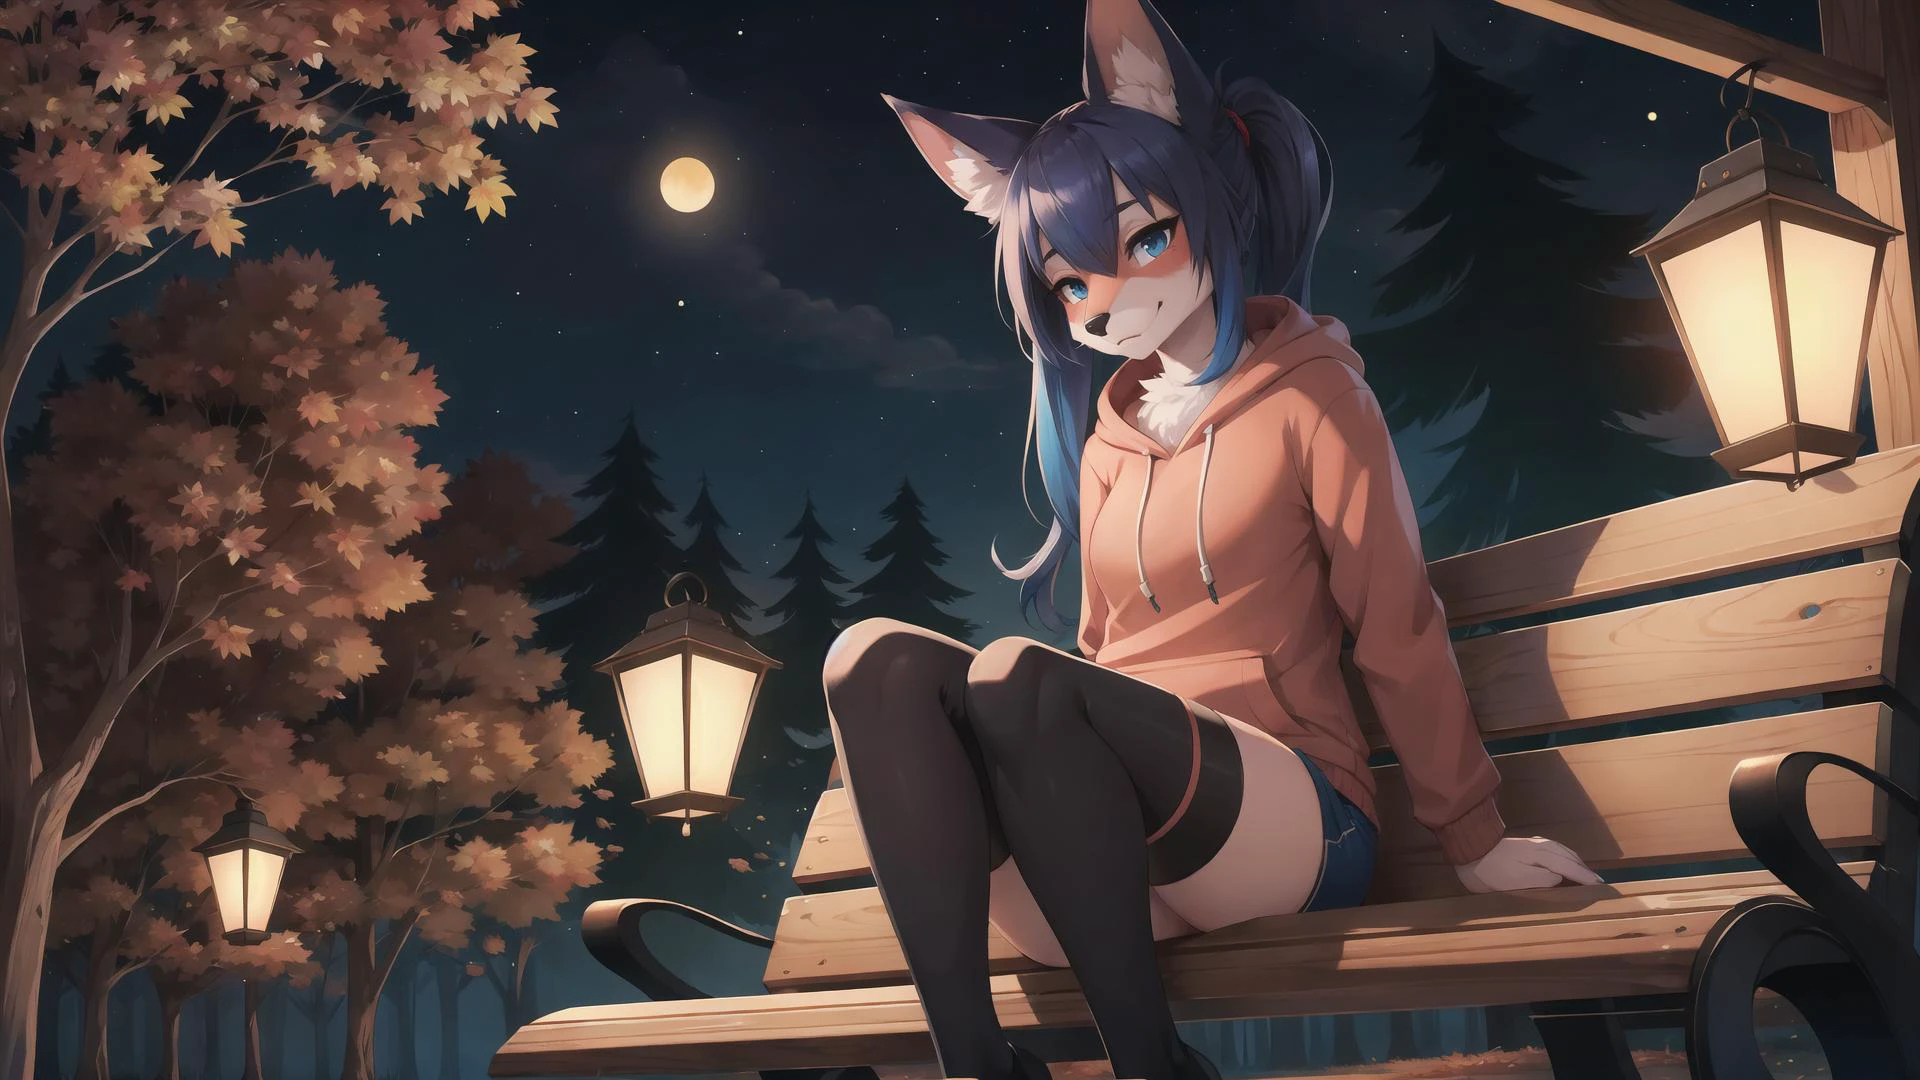 well defined female,fox ears,fox tail,sitting on a bench,thighhighs,shorts,hoodie with design,scarf,long messy shiny dark blue hair,long messy twintails,deep in the forest,autumn,windy,lanterns,night sky,night,anthro,